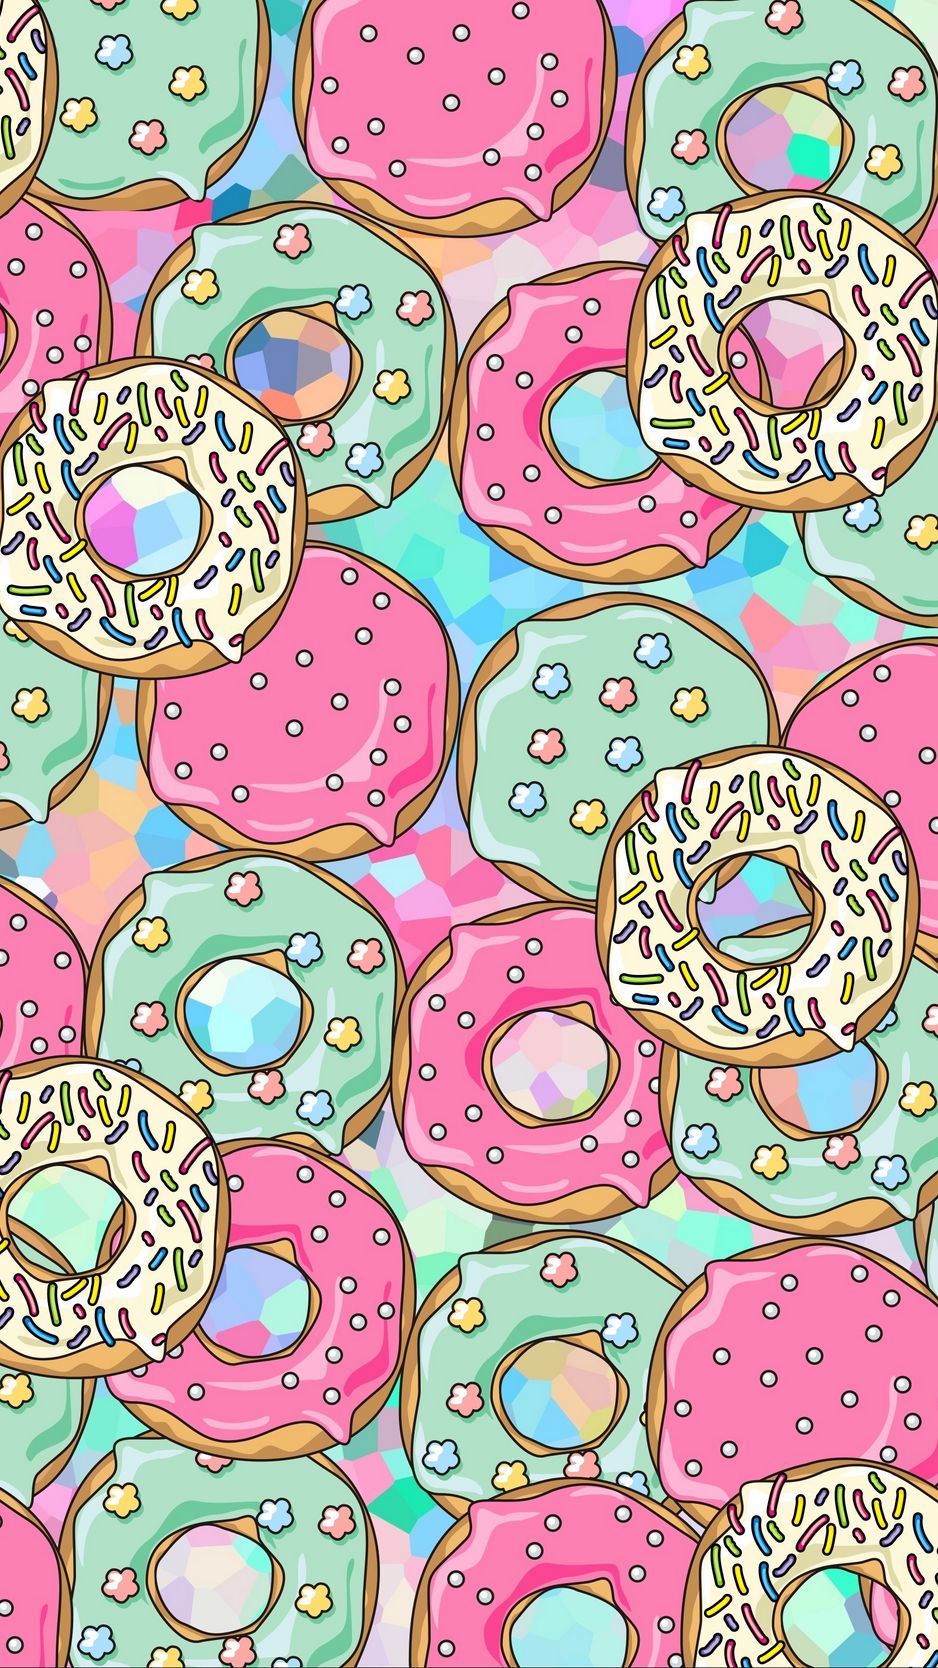 donuts Live Wallpaper - free download